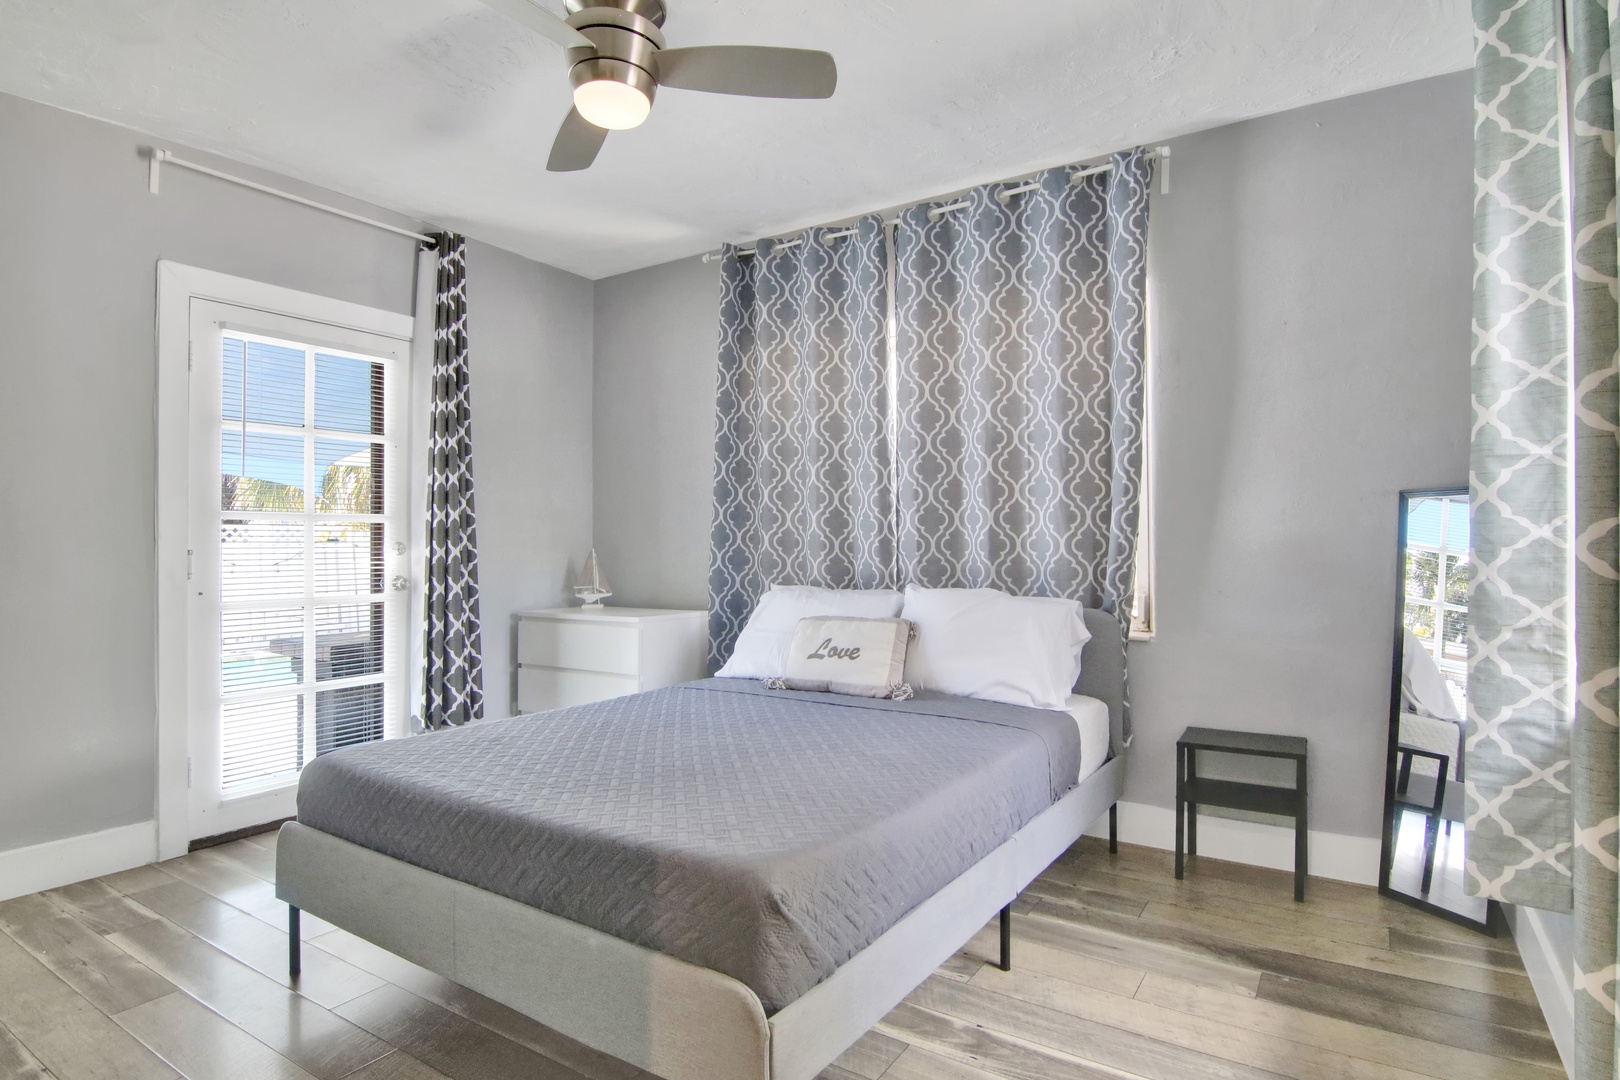 Unit 2: This cozy queen bedroom offers a Smart TV & access to the pool area